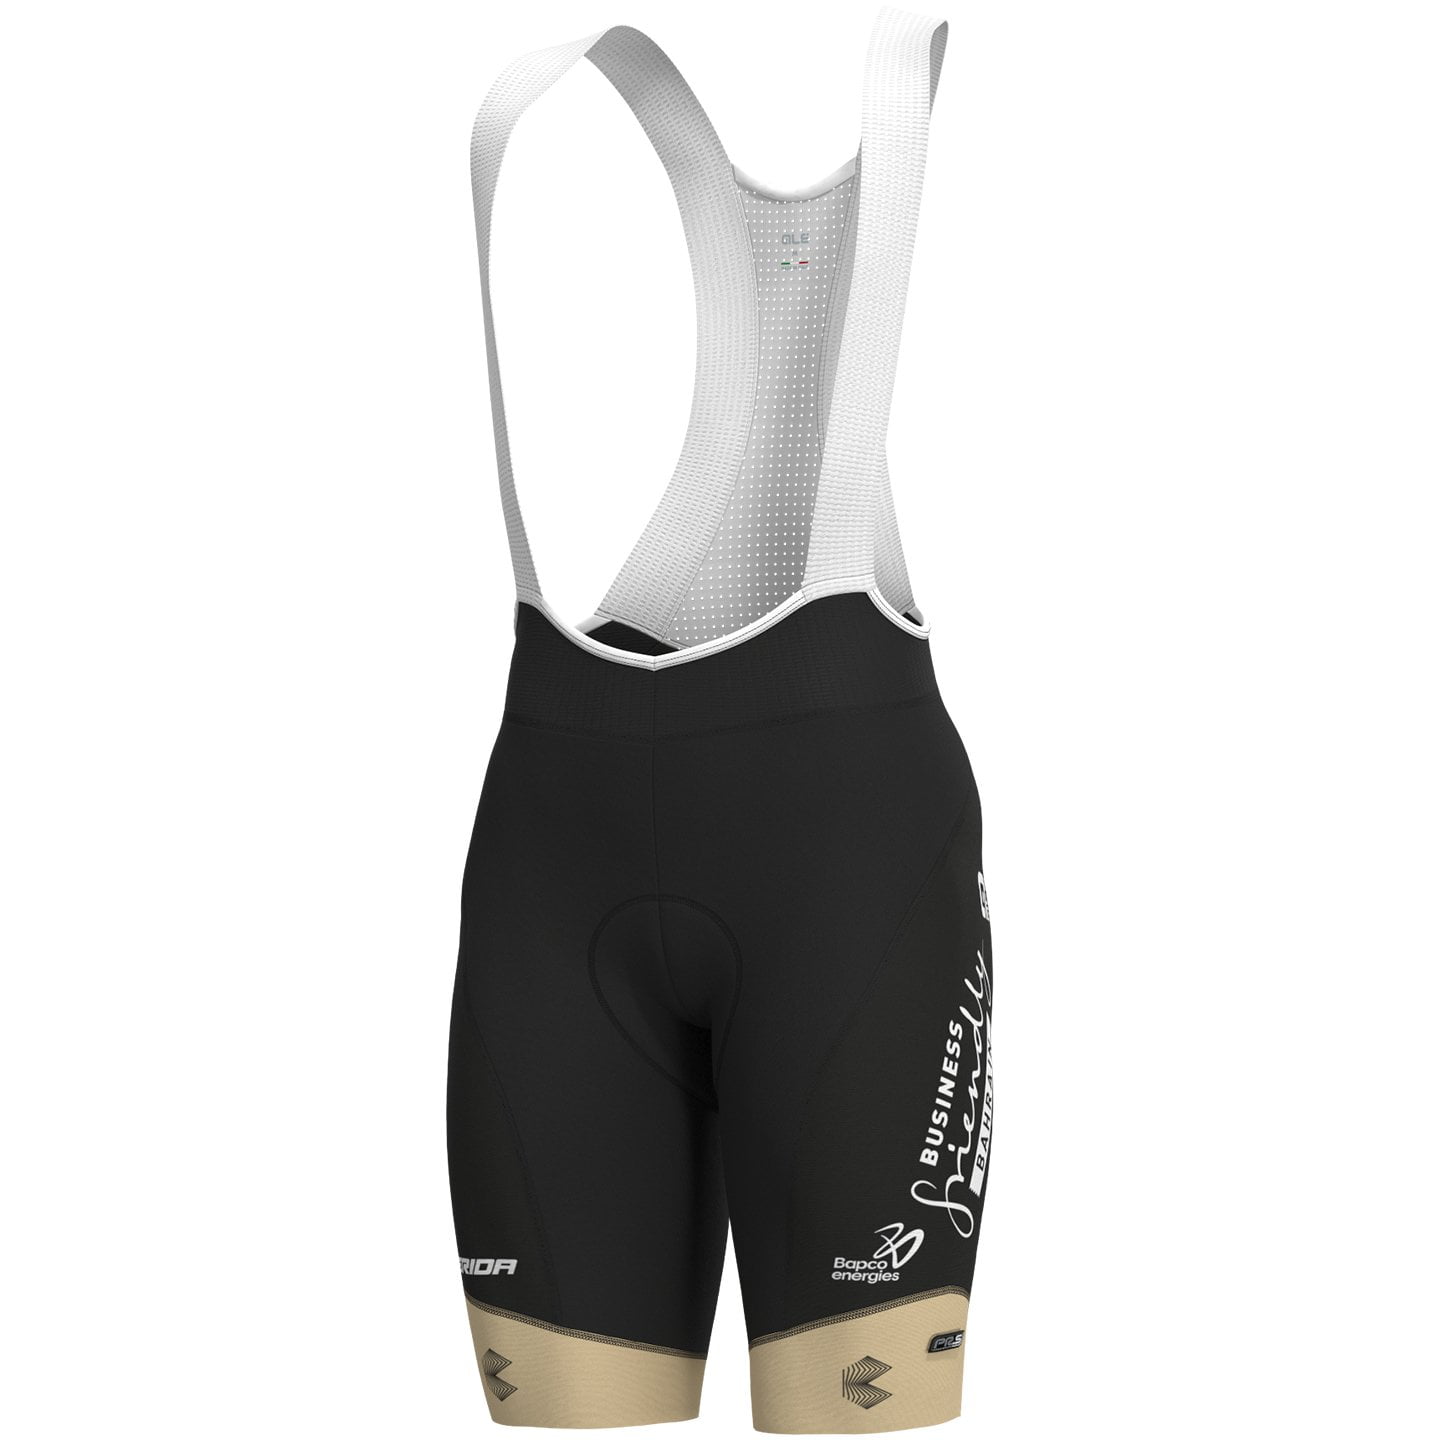 BAHRAIN - VICTORIOUS PR.S TdF 2023 Bib Shorts, for men, size 2XL, Cycle trousers, Cycle gear